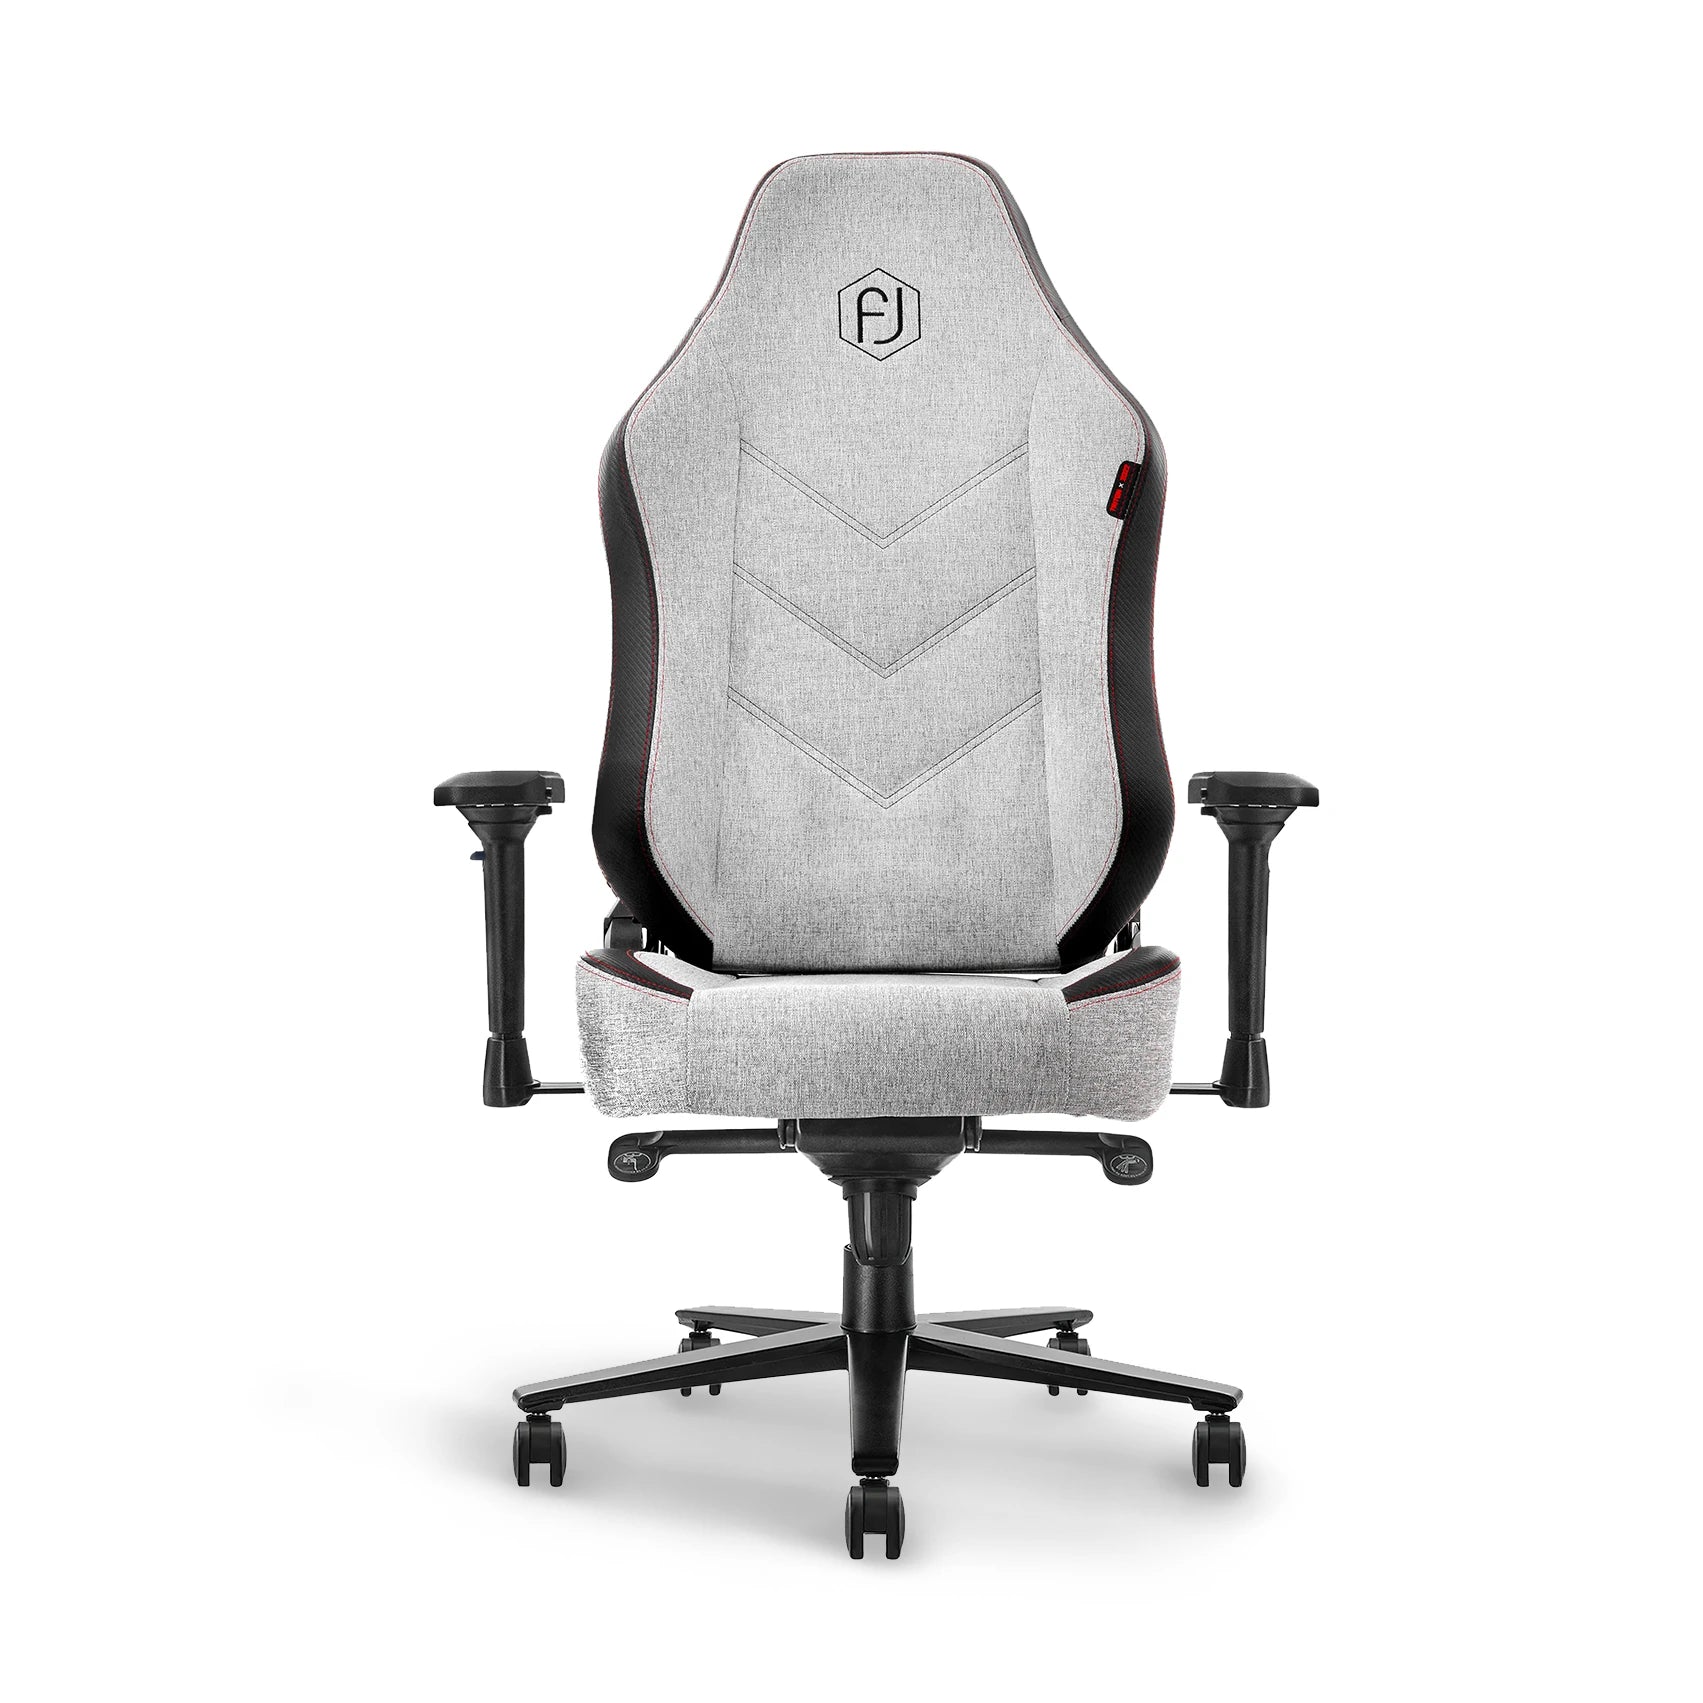 Greige Grey ergonomic chair with unique stitching pattern and comfortable backrest, frontal view.